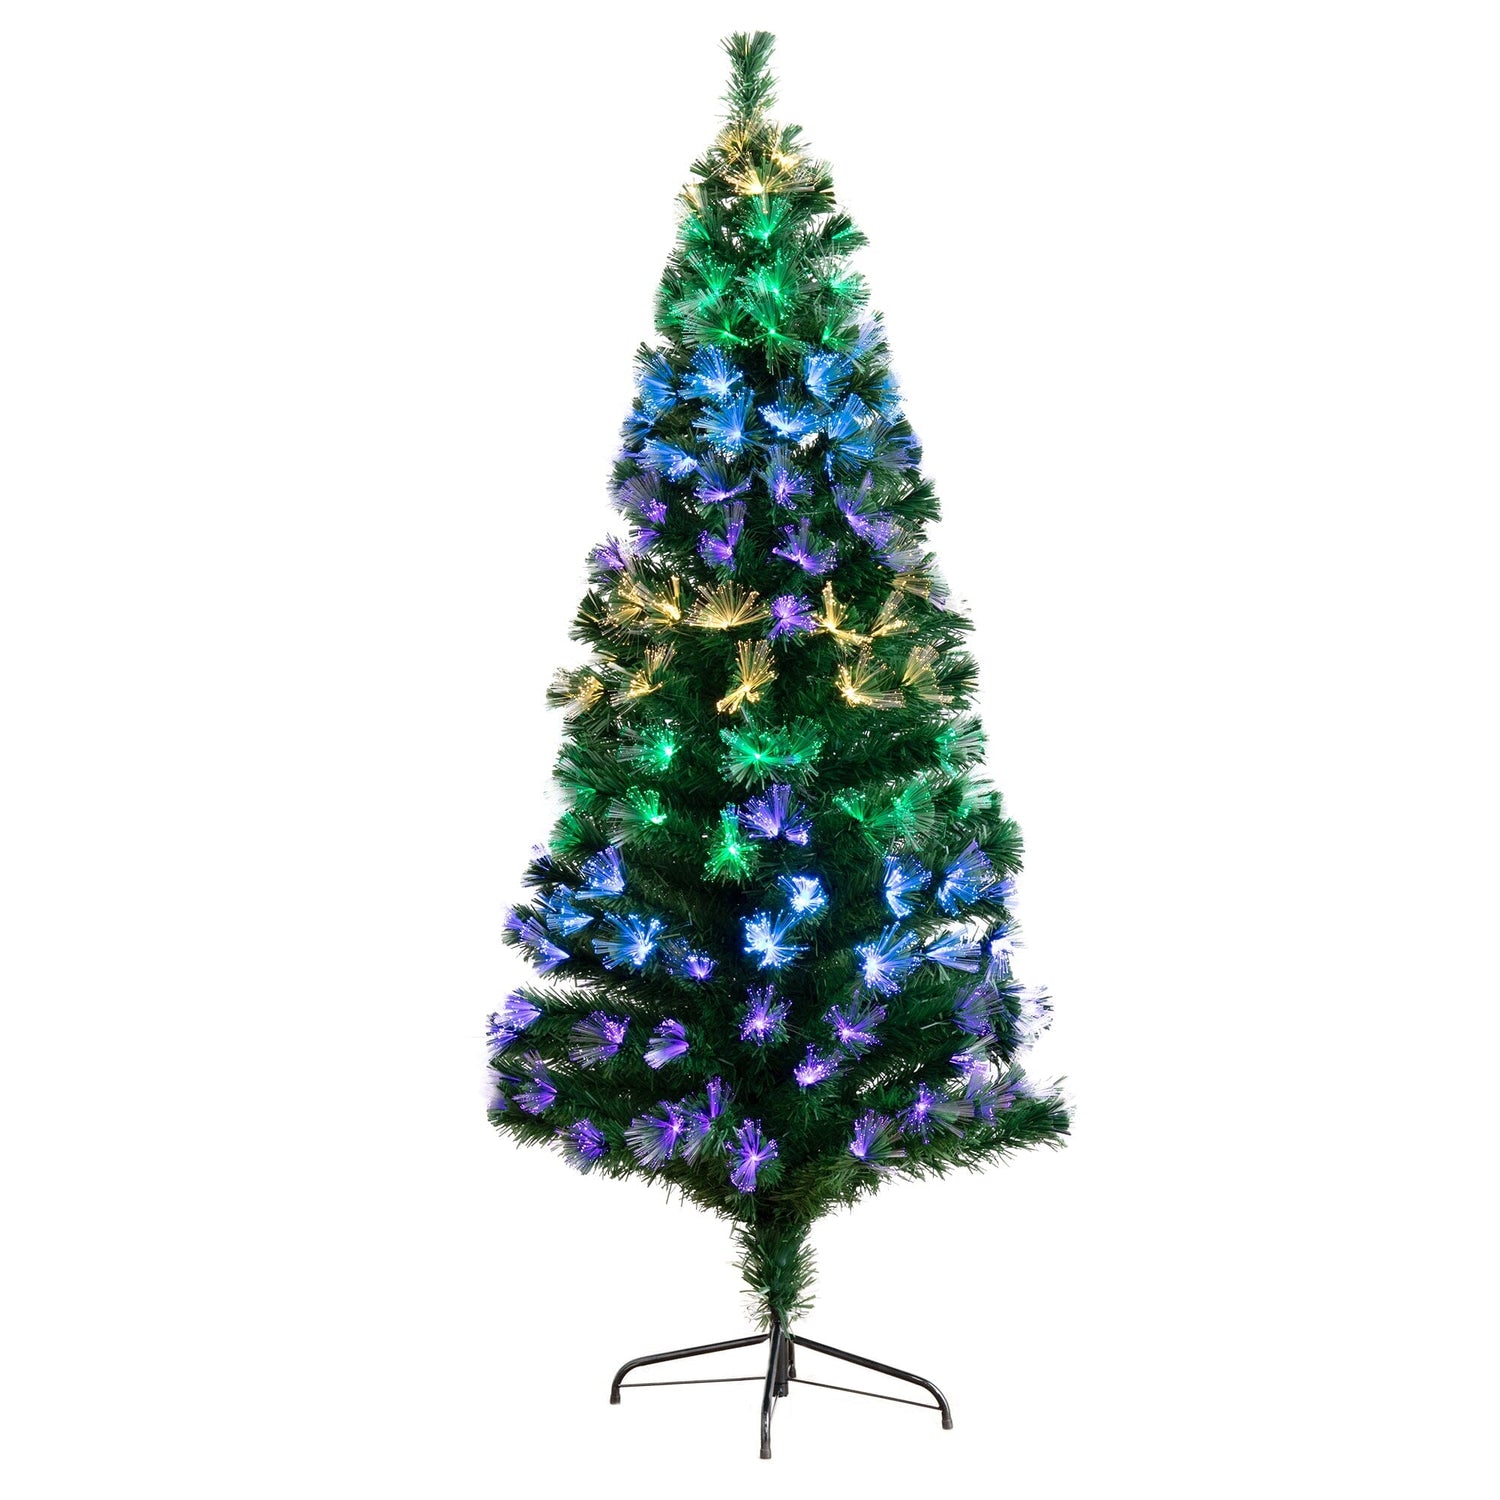 6' Pre-Lit Fiber Optic Artificial Christmas Tree with 220 Colorful LED Lights